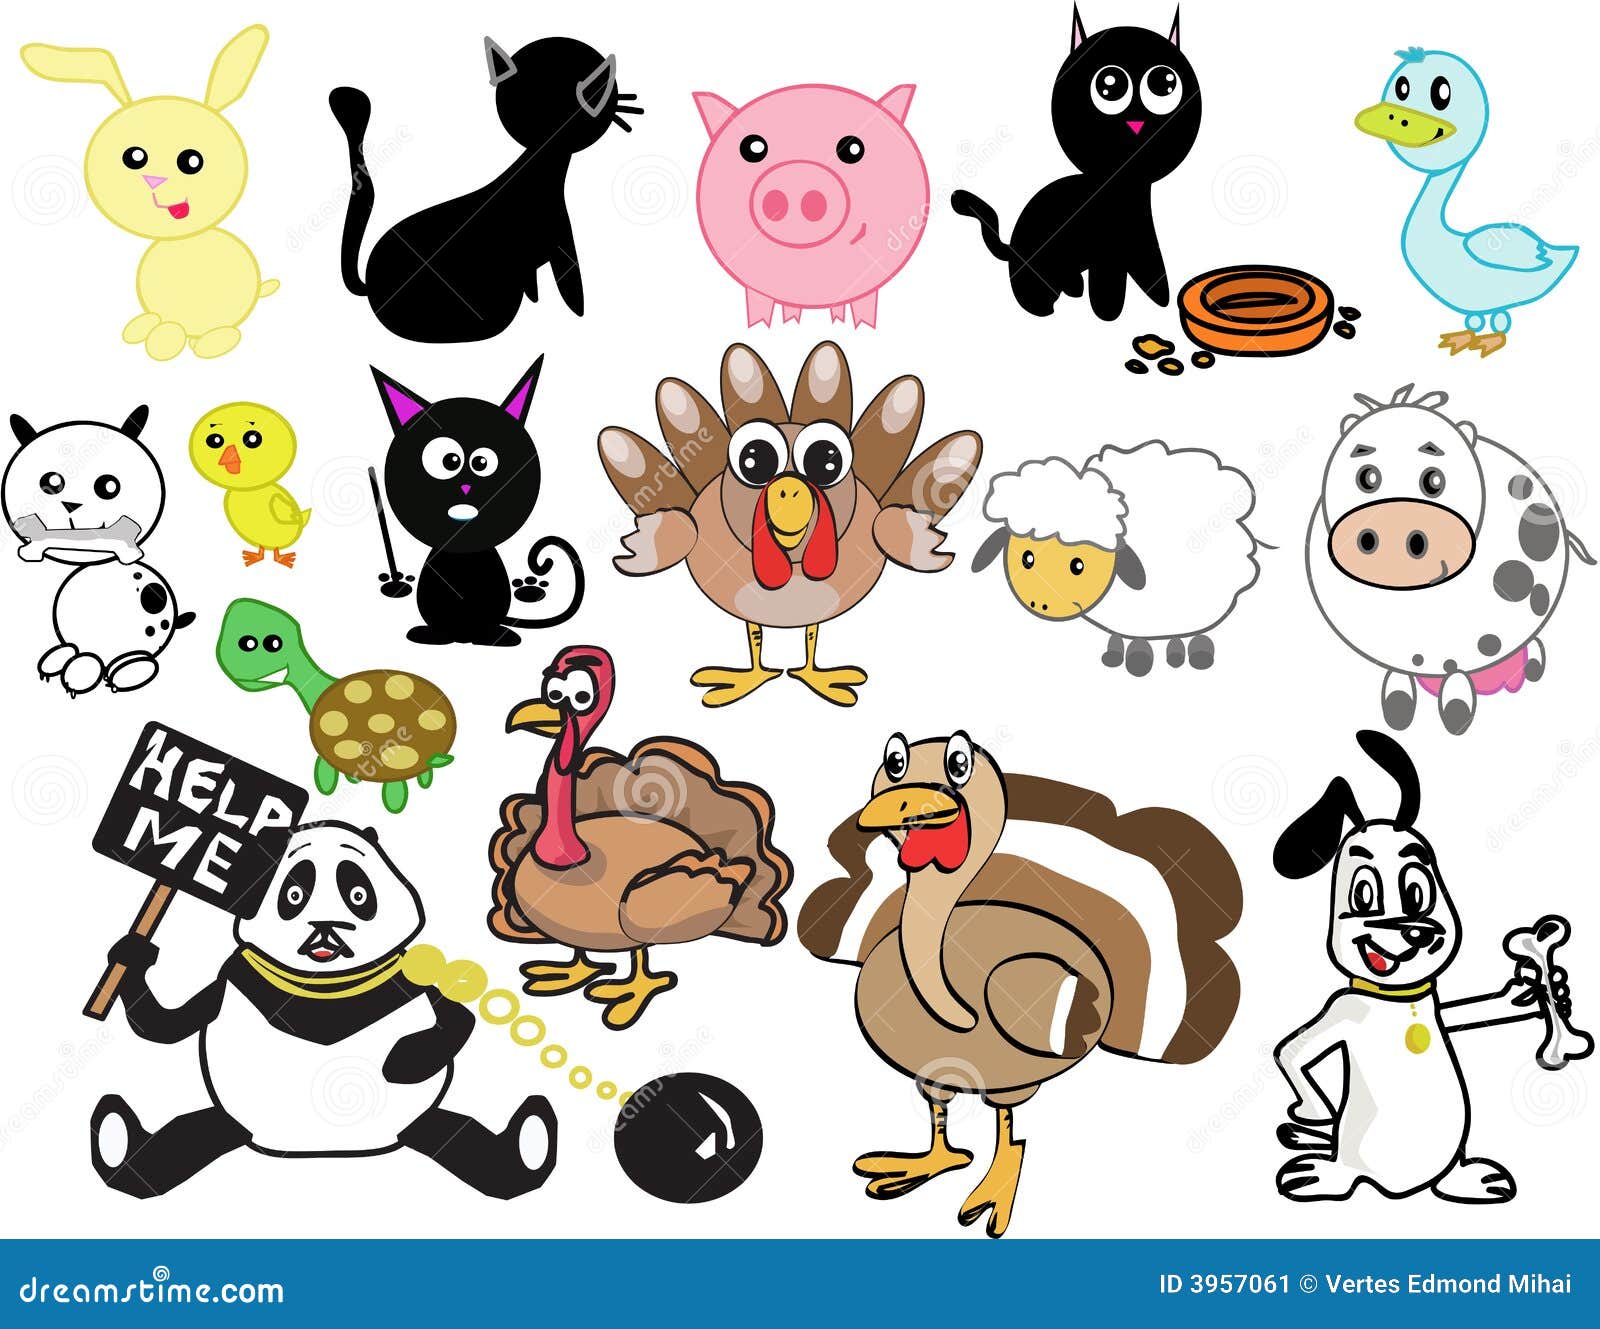 clipart images of domestic animals - photo #25